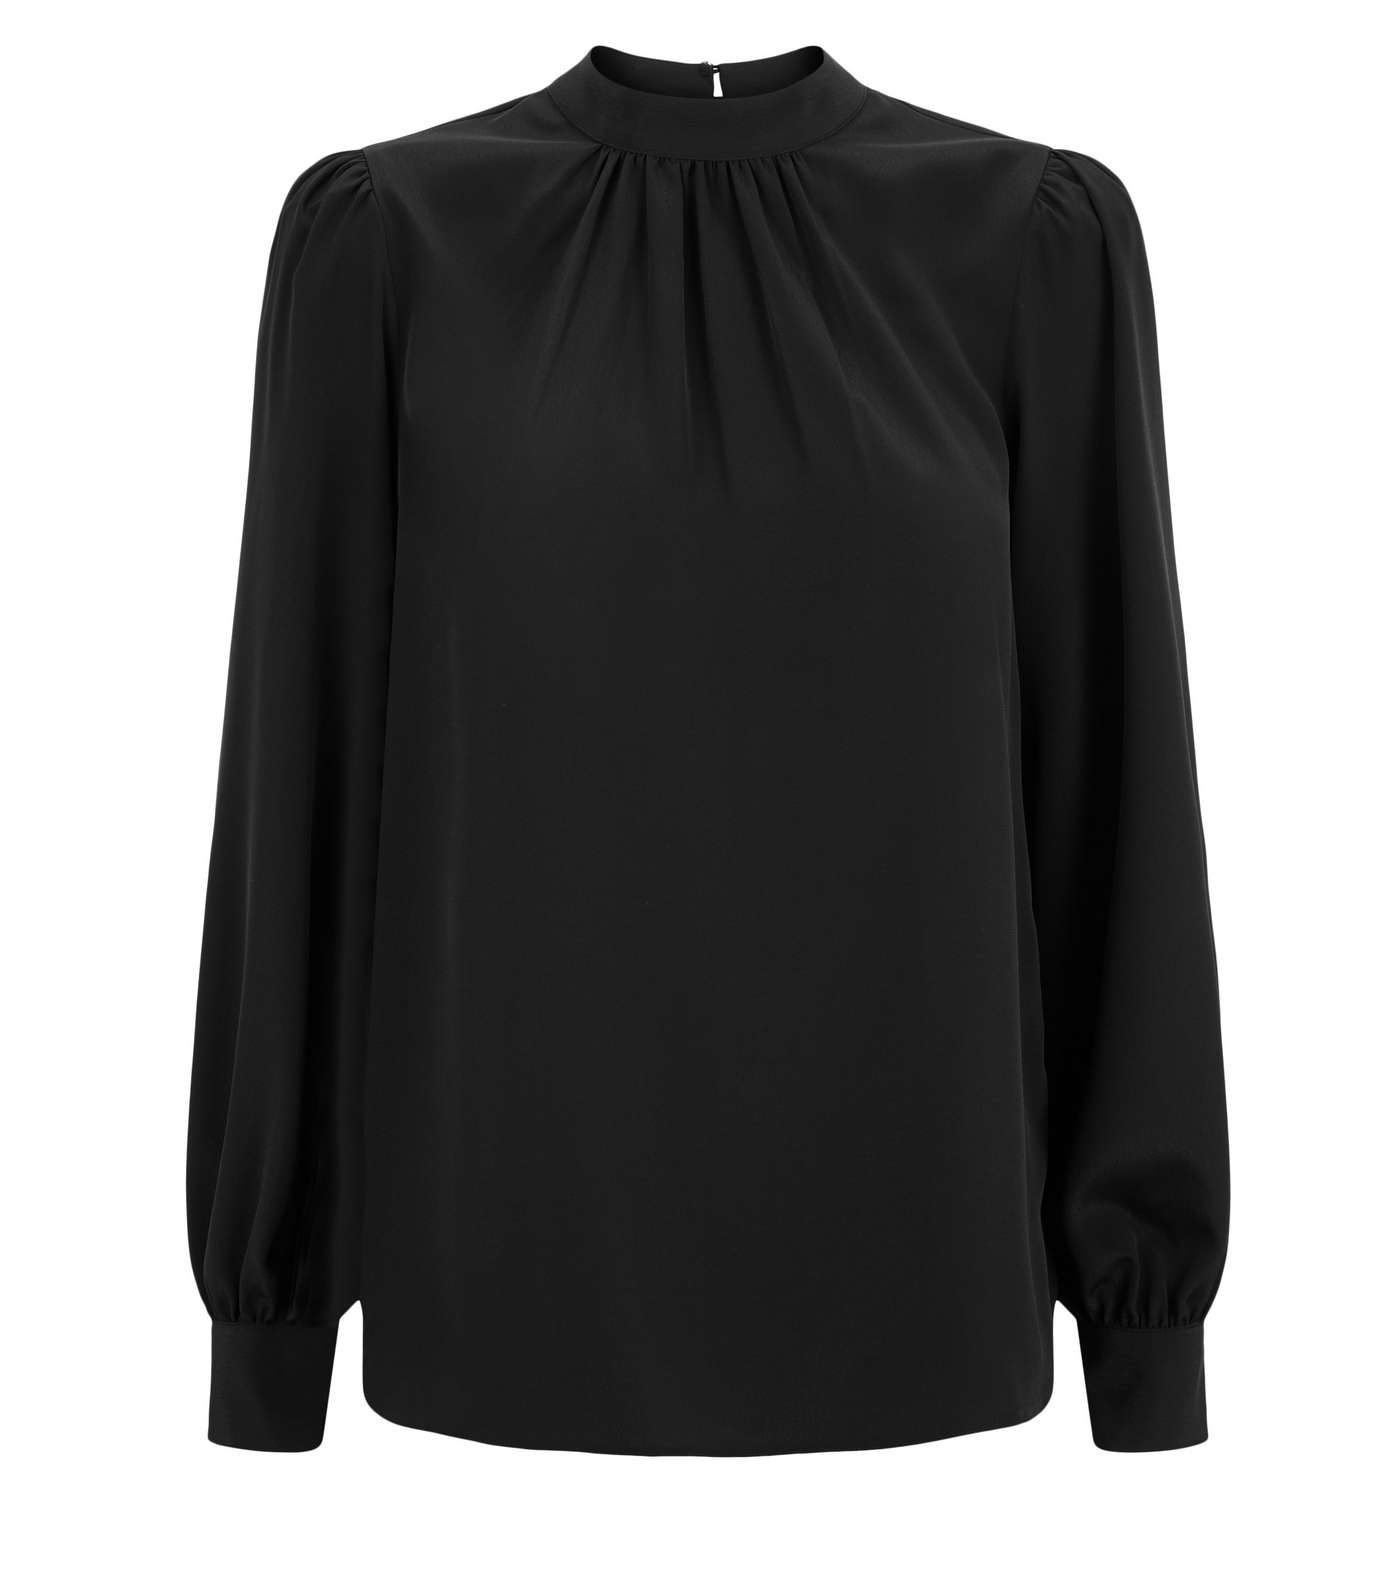 Black High Neck Blouse | New Look